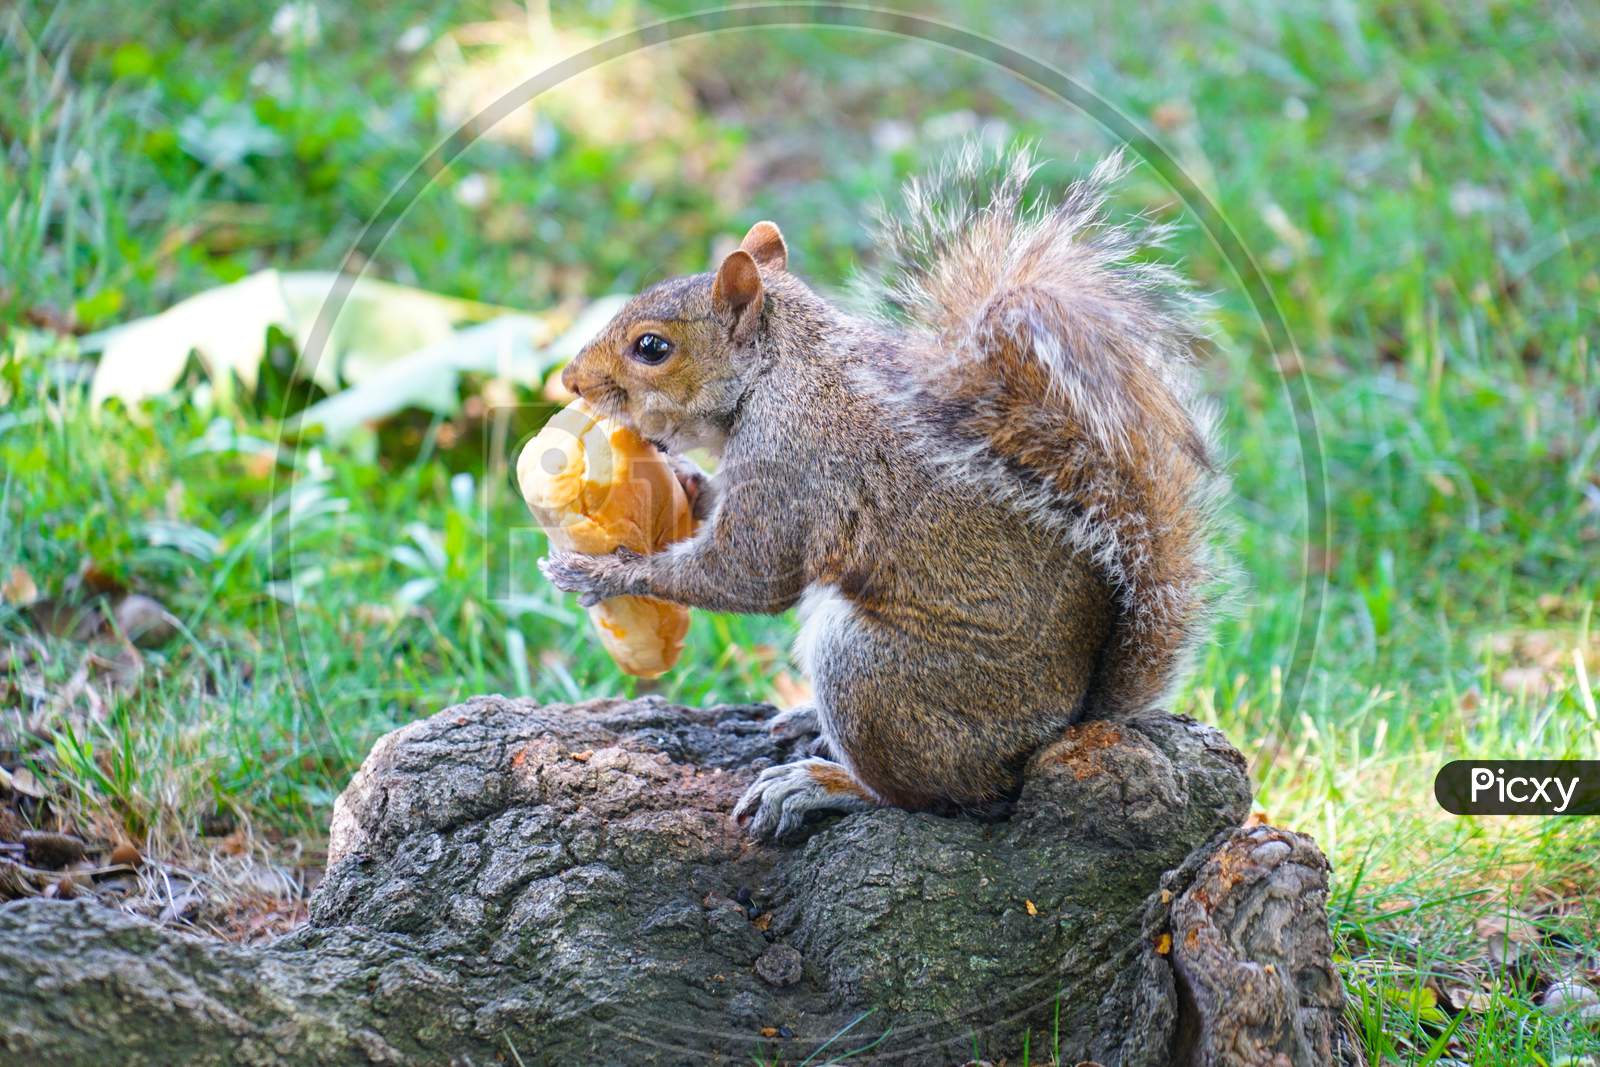 Of Squirrel Eating Bread Image